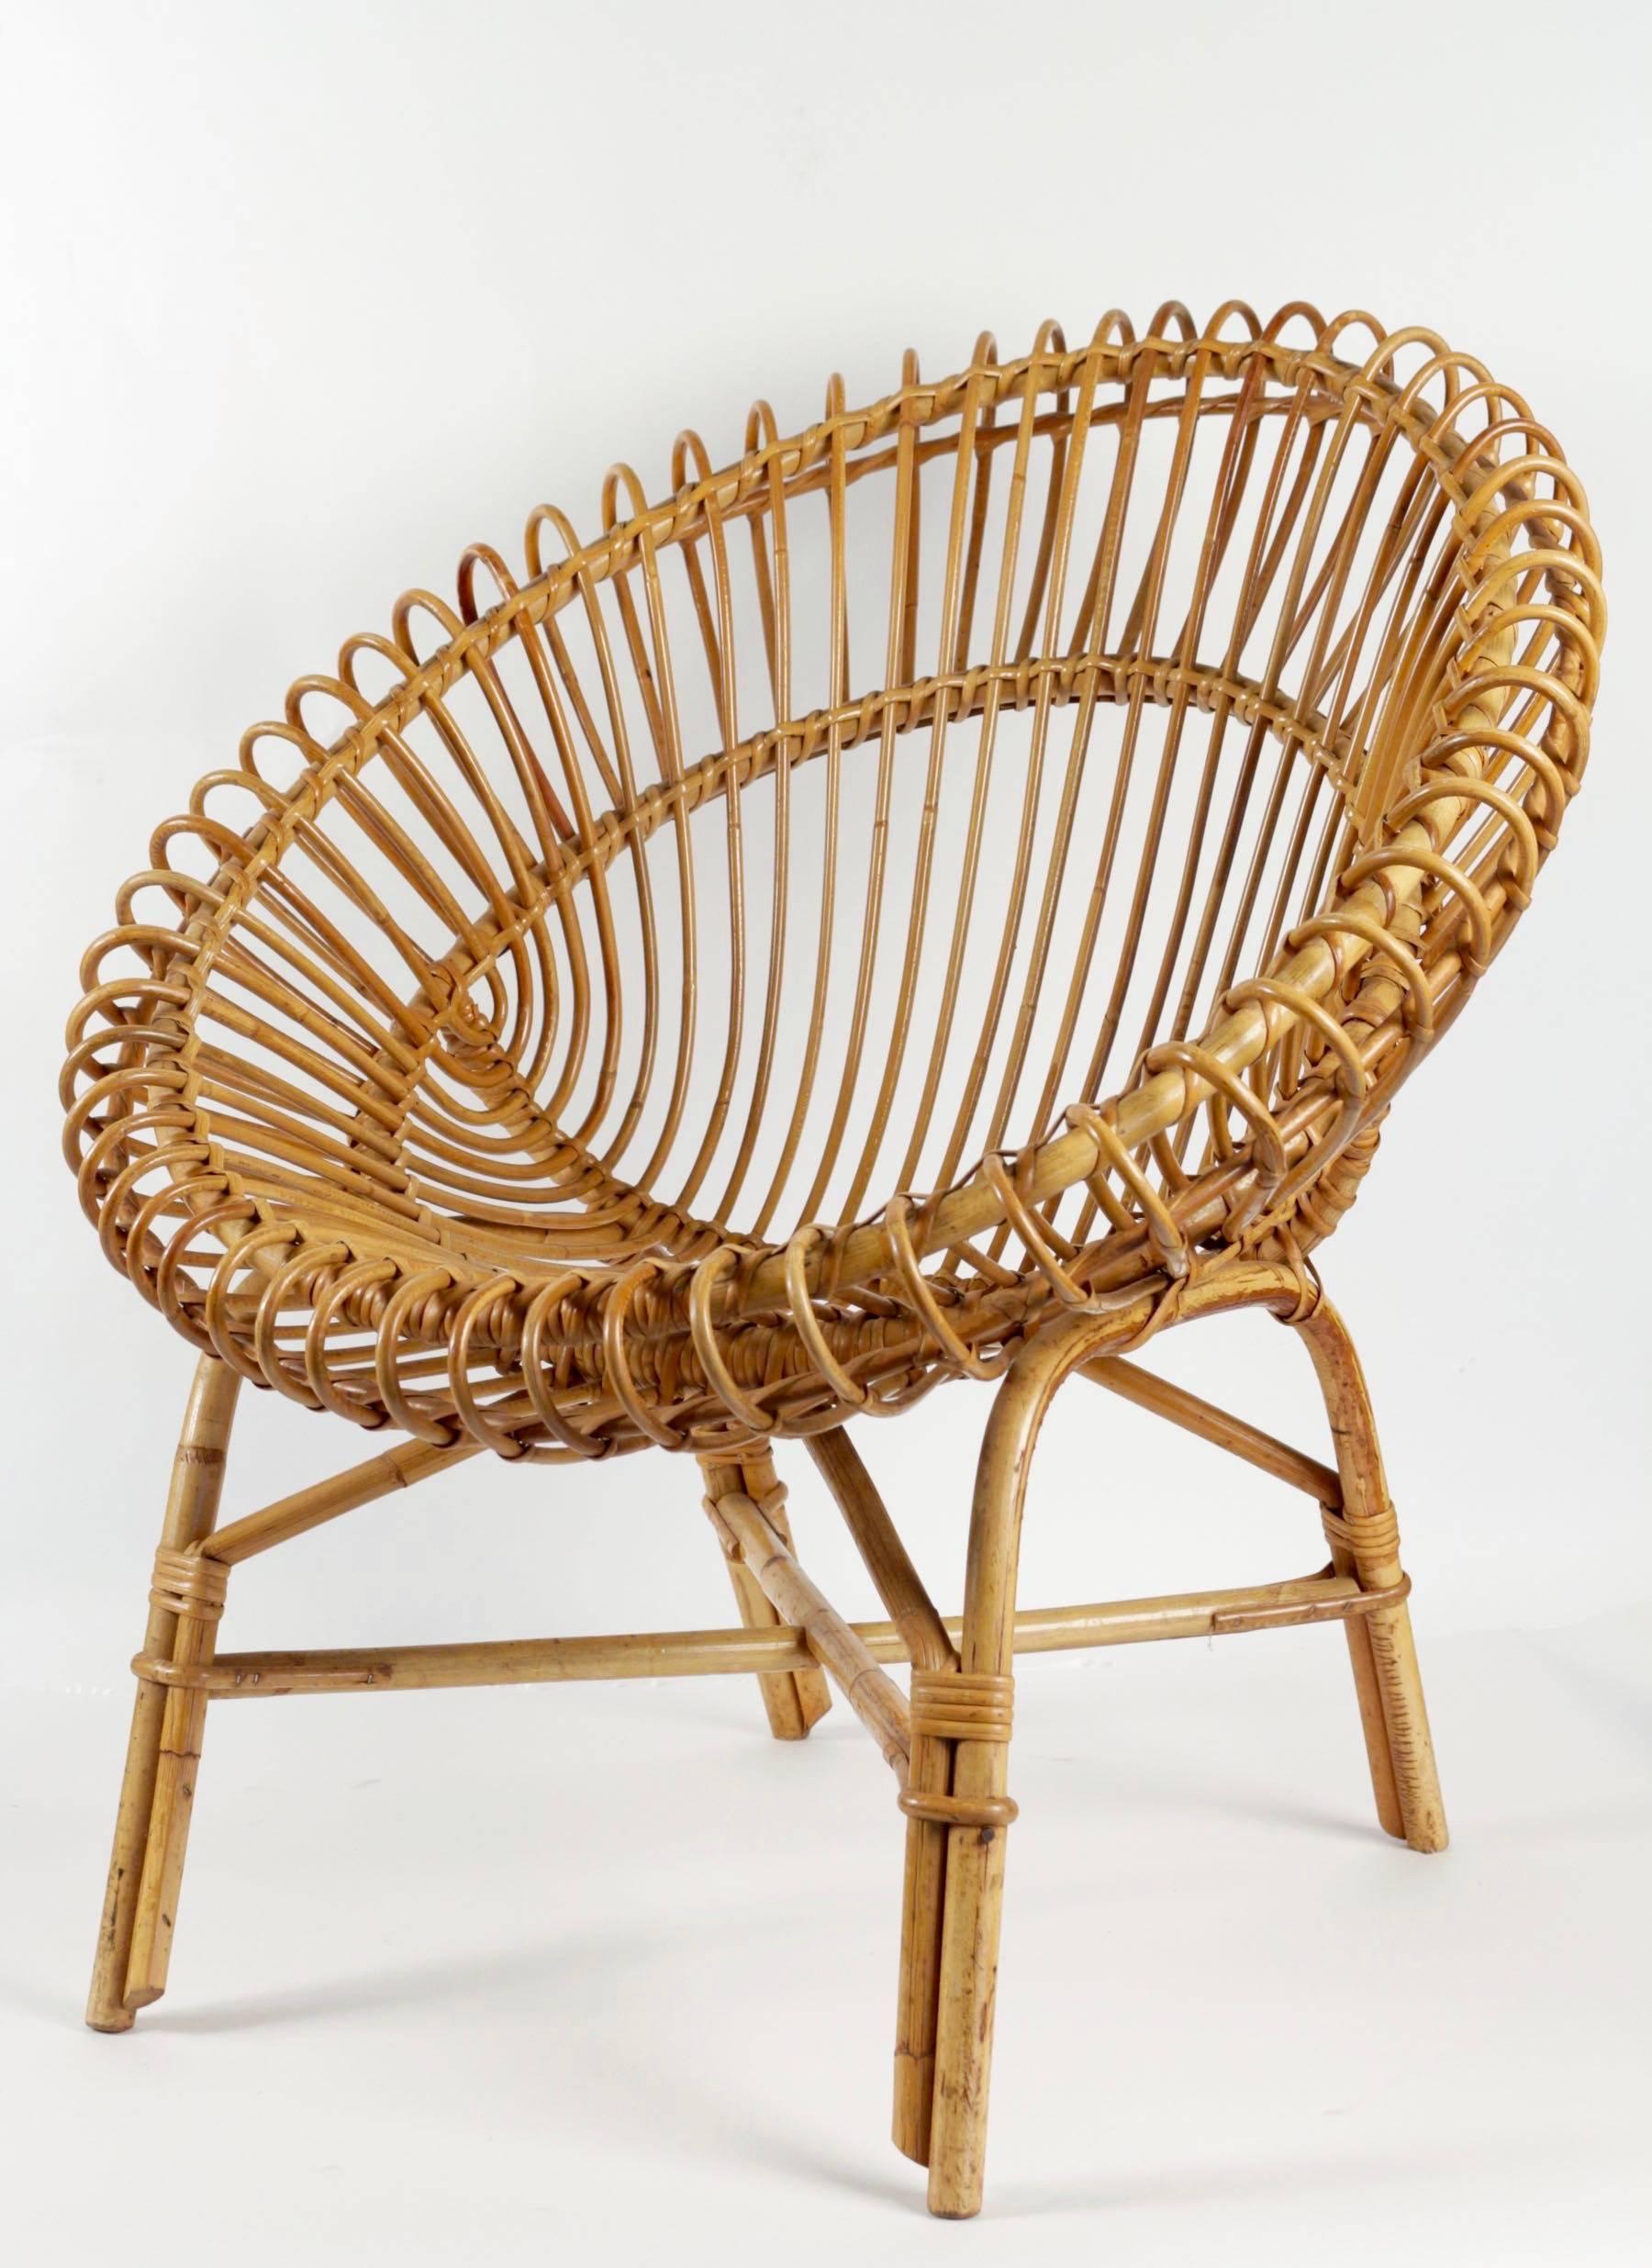 1950 rattan set attributed to Franco Albini.

The set is composed by one coffee table and two lounge chairs.  

Excellent rattan condition.
     